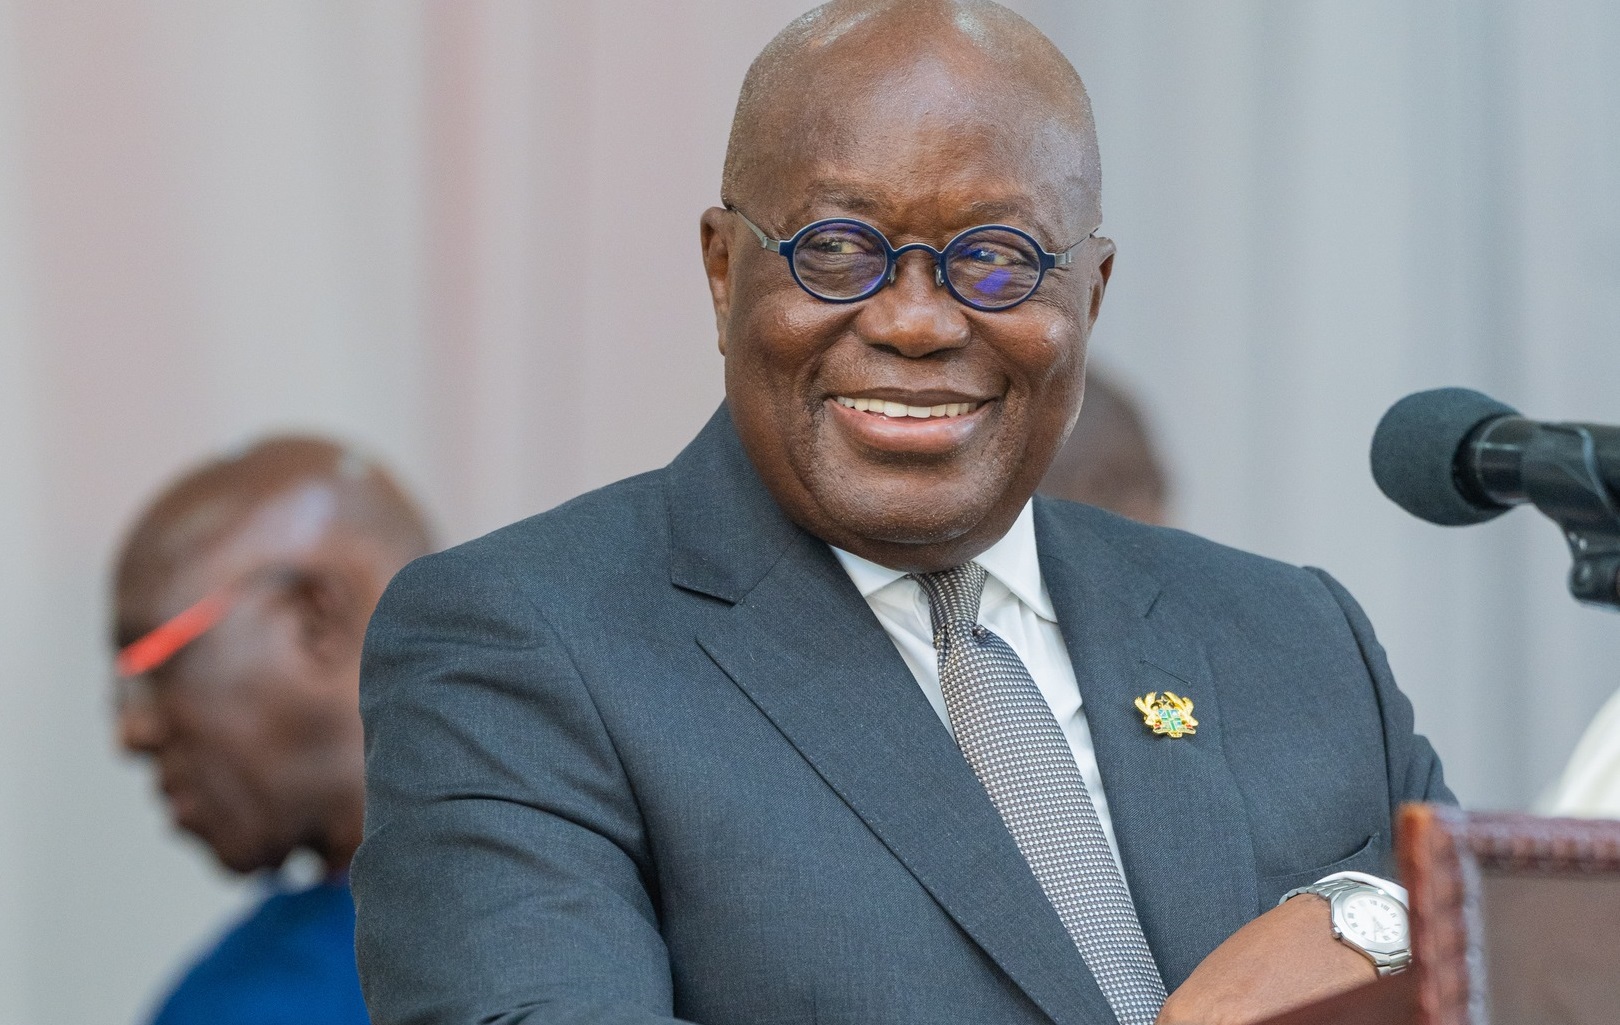 Akonta Mining not involved in illegal activities - President Akufo-Addo